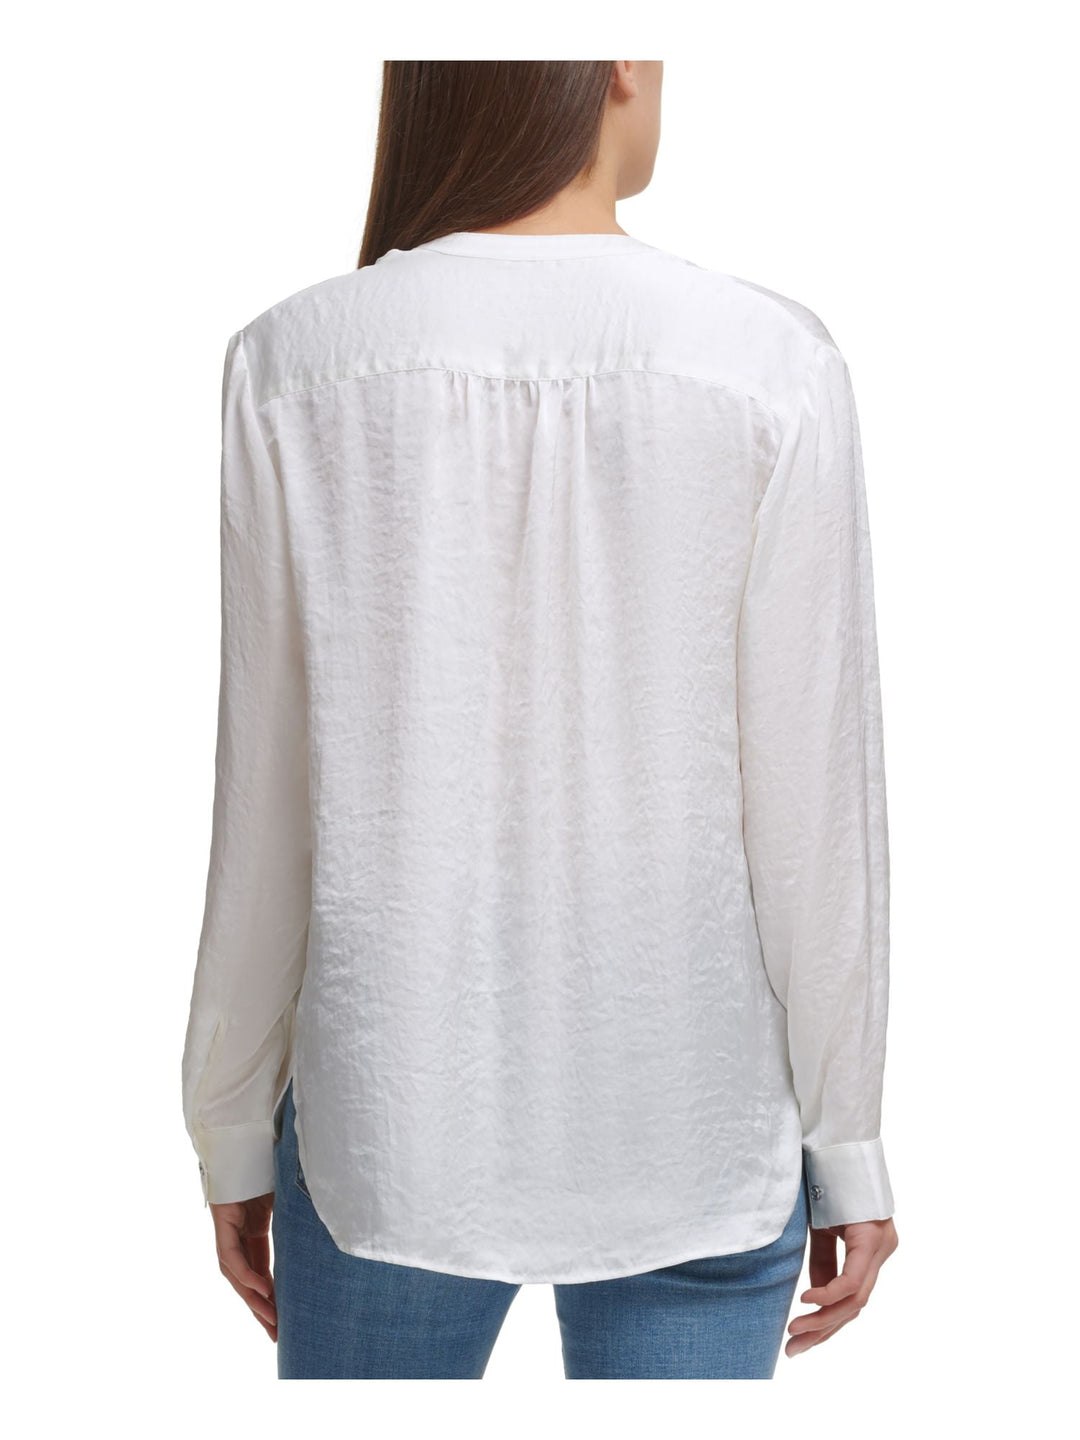 DKNY Women's Sheer Pleated Blouse White Size Large